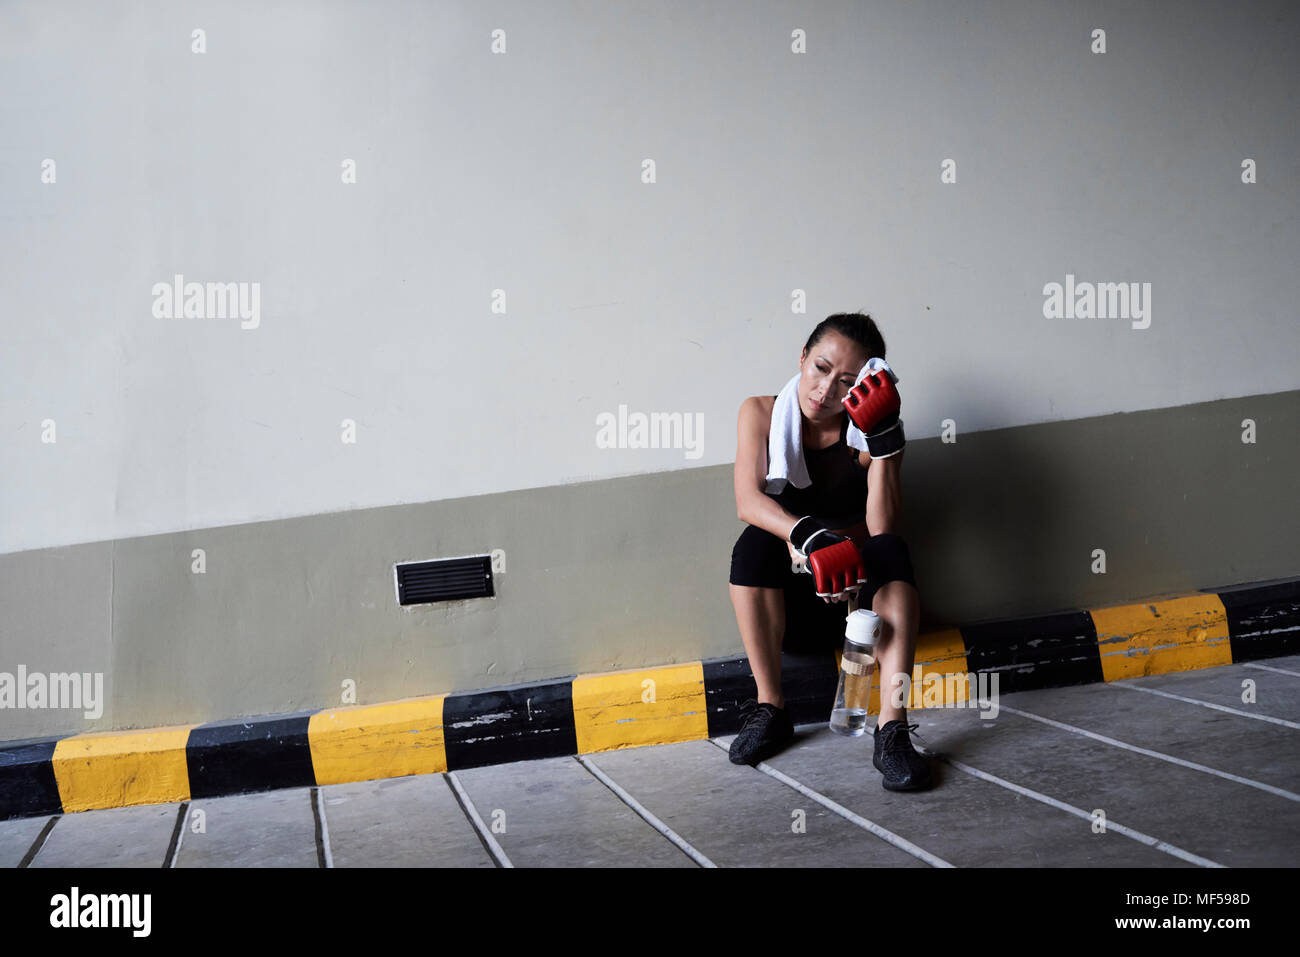 Female boxer sitting in a garage holding a towel Stock Photo